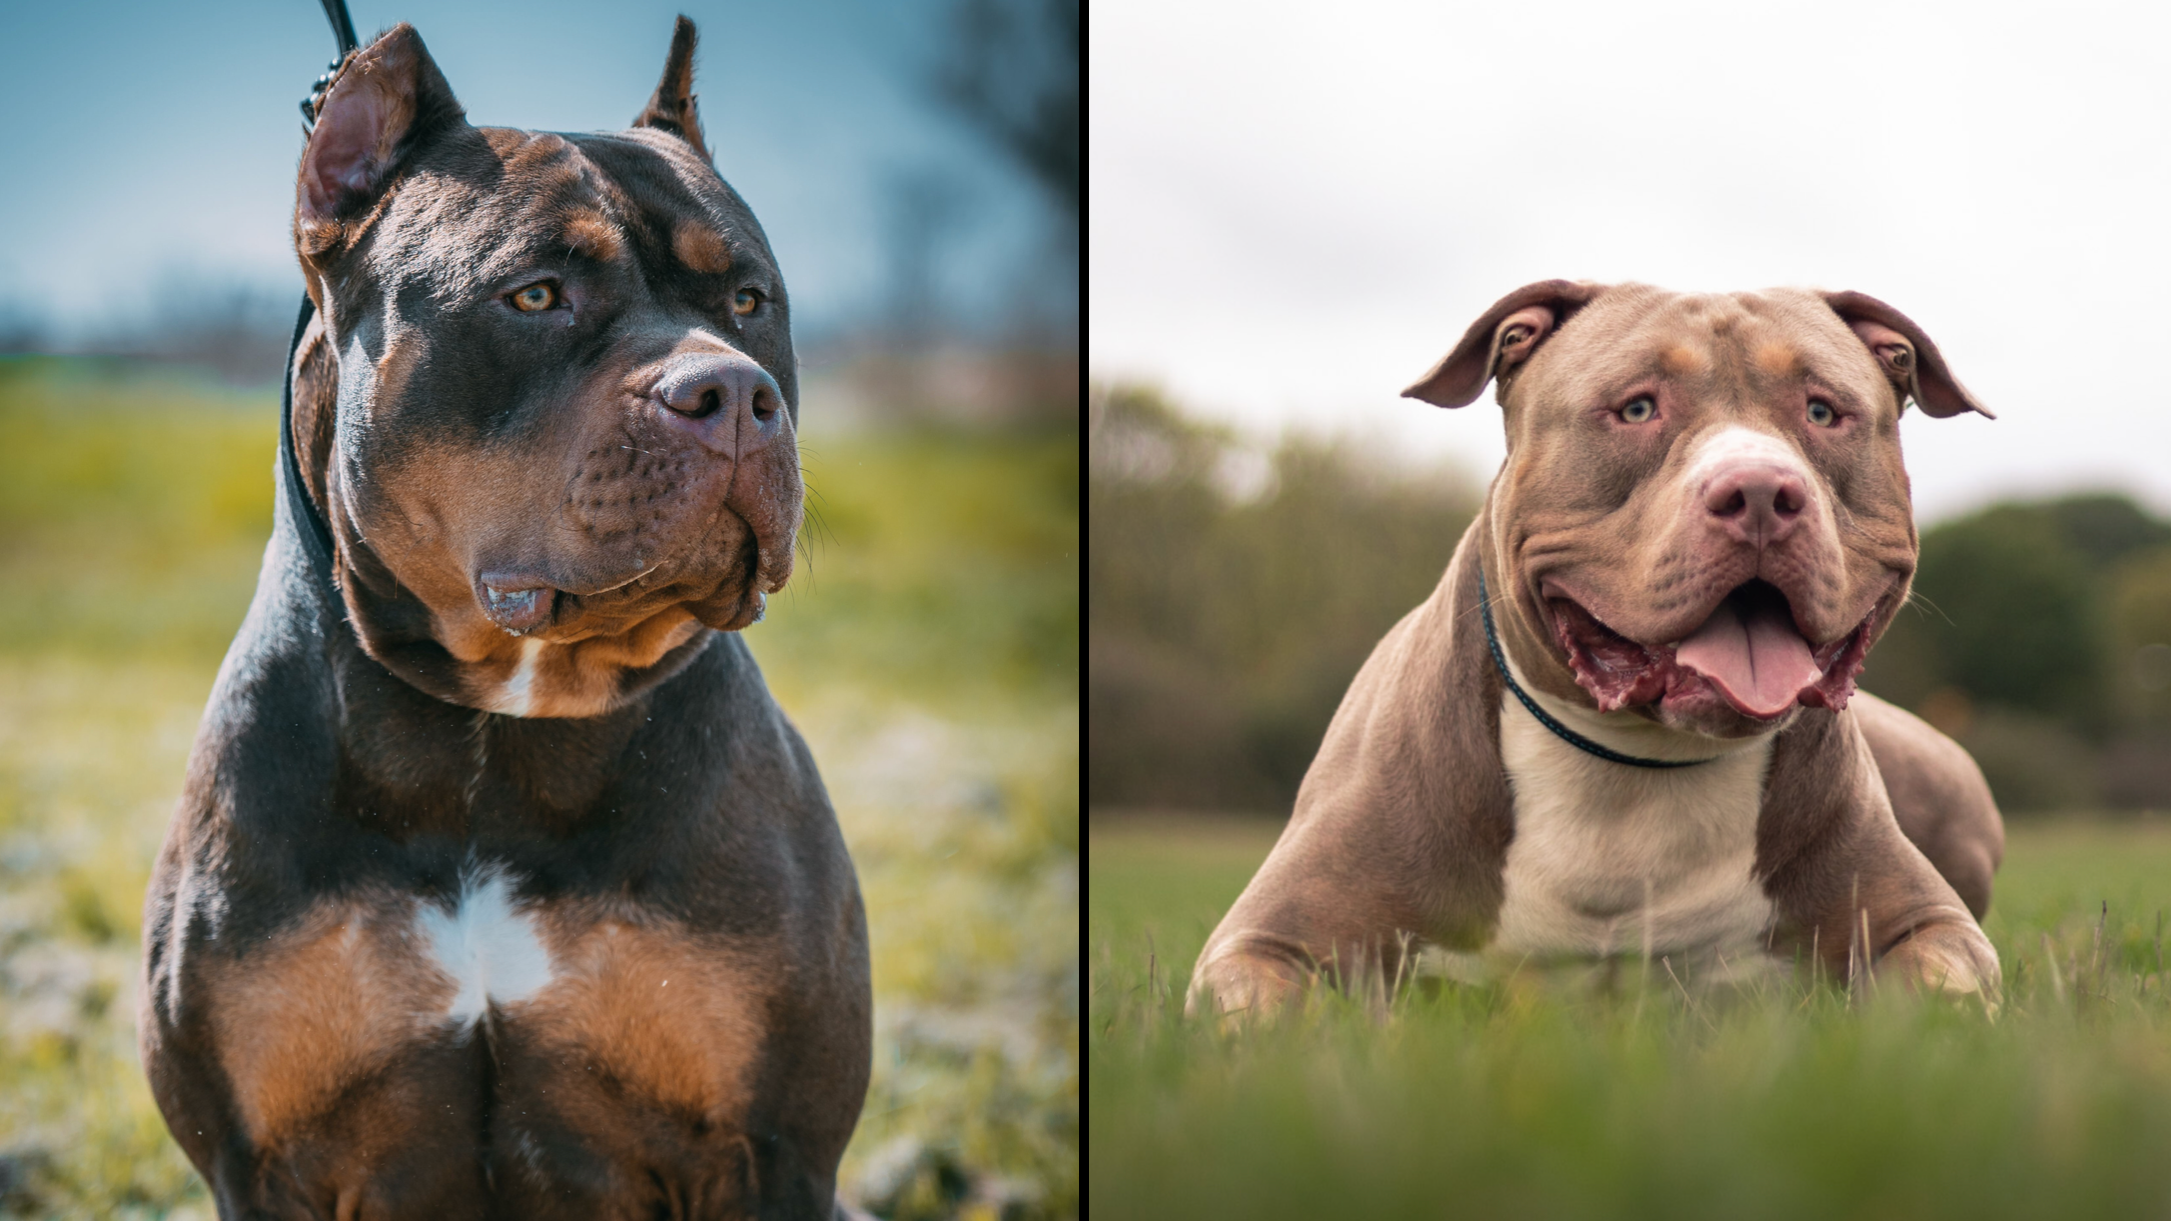 XL bully dog: What date does ban on dangerous breed begin?